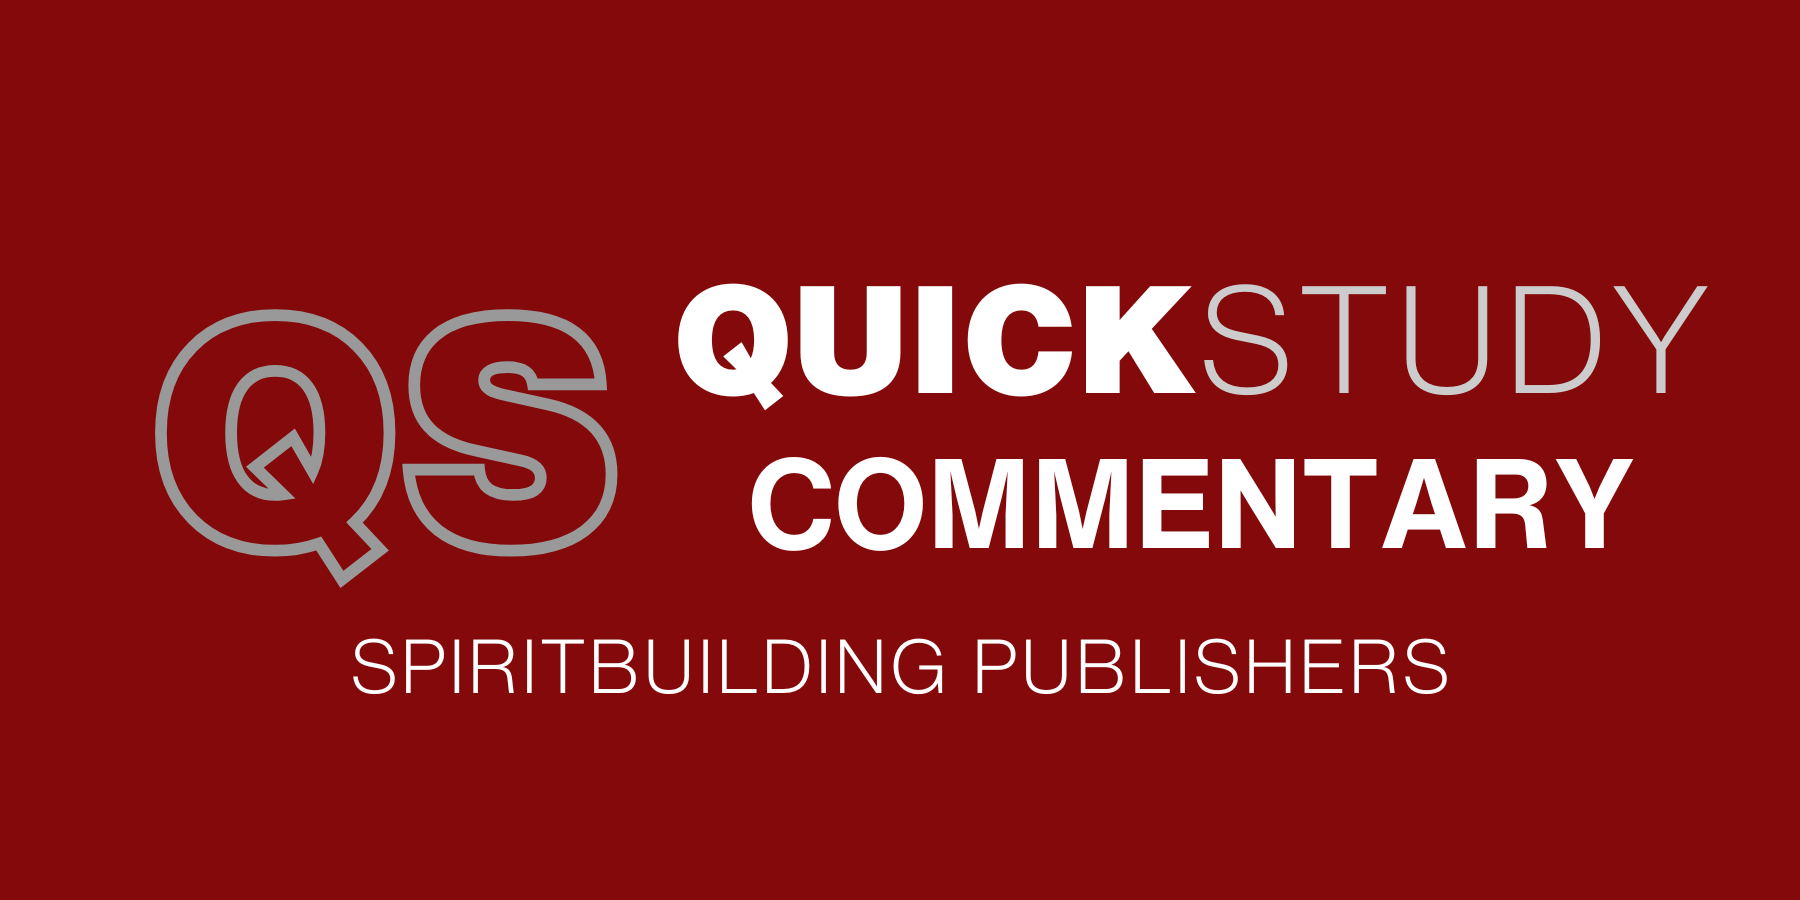 Introducing the Quick Study Commentary Series!